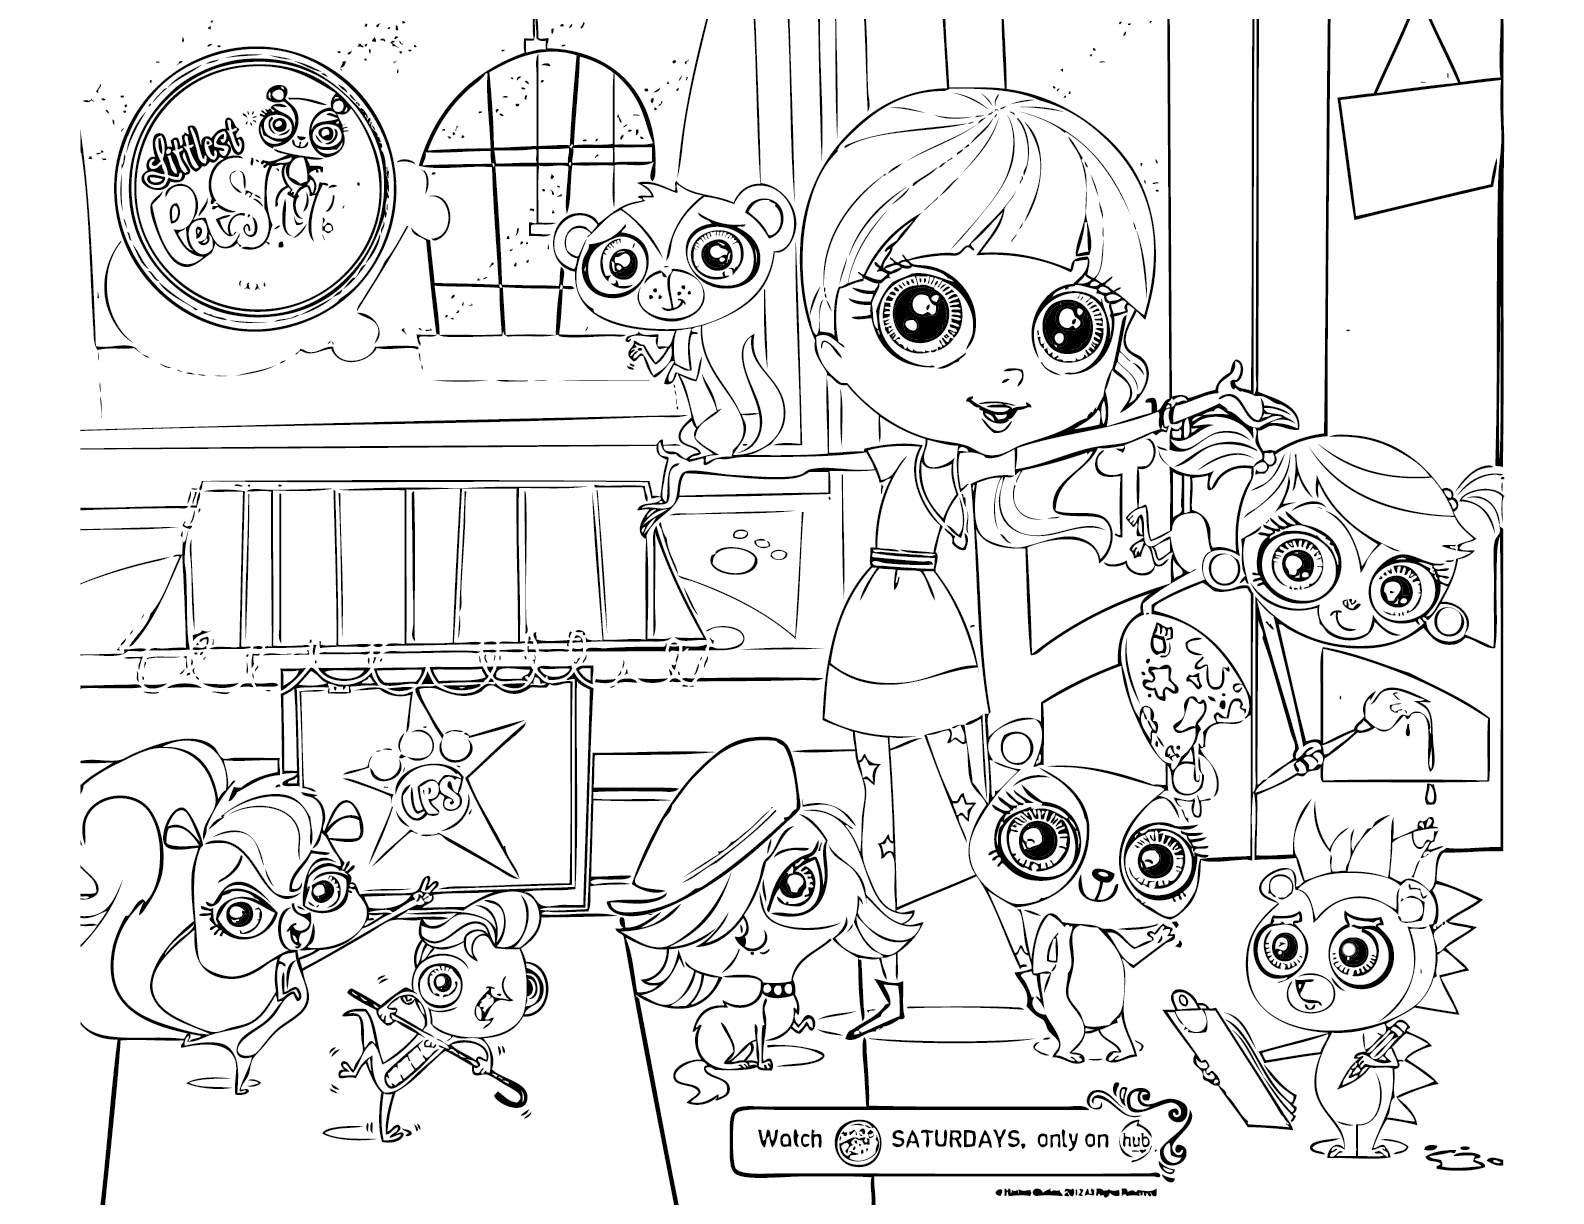 Squid Army: Littlest Pet Shop coloring pages